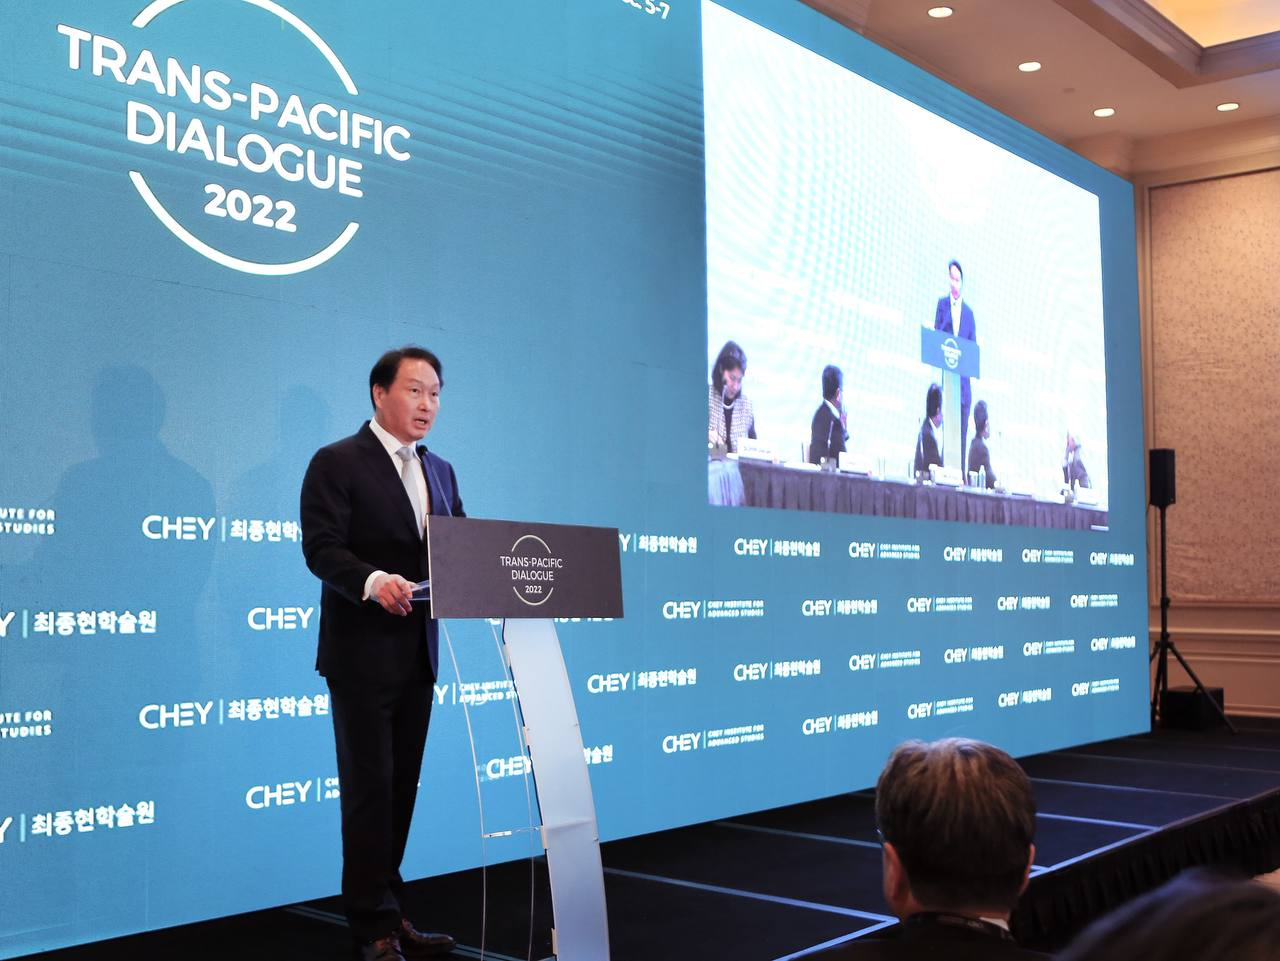 SK Group Chairman Chey Tae-won speaks at the 2022 Trans-Pacific Dialogue hosted by the Chey Institute for Advanced Studies, held in Washington DC, on Monday. (SK Group)